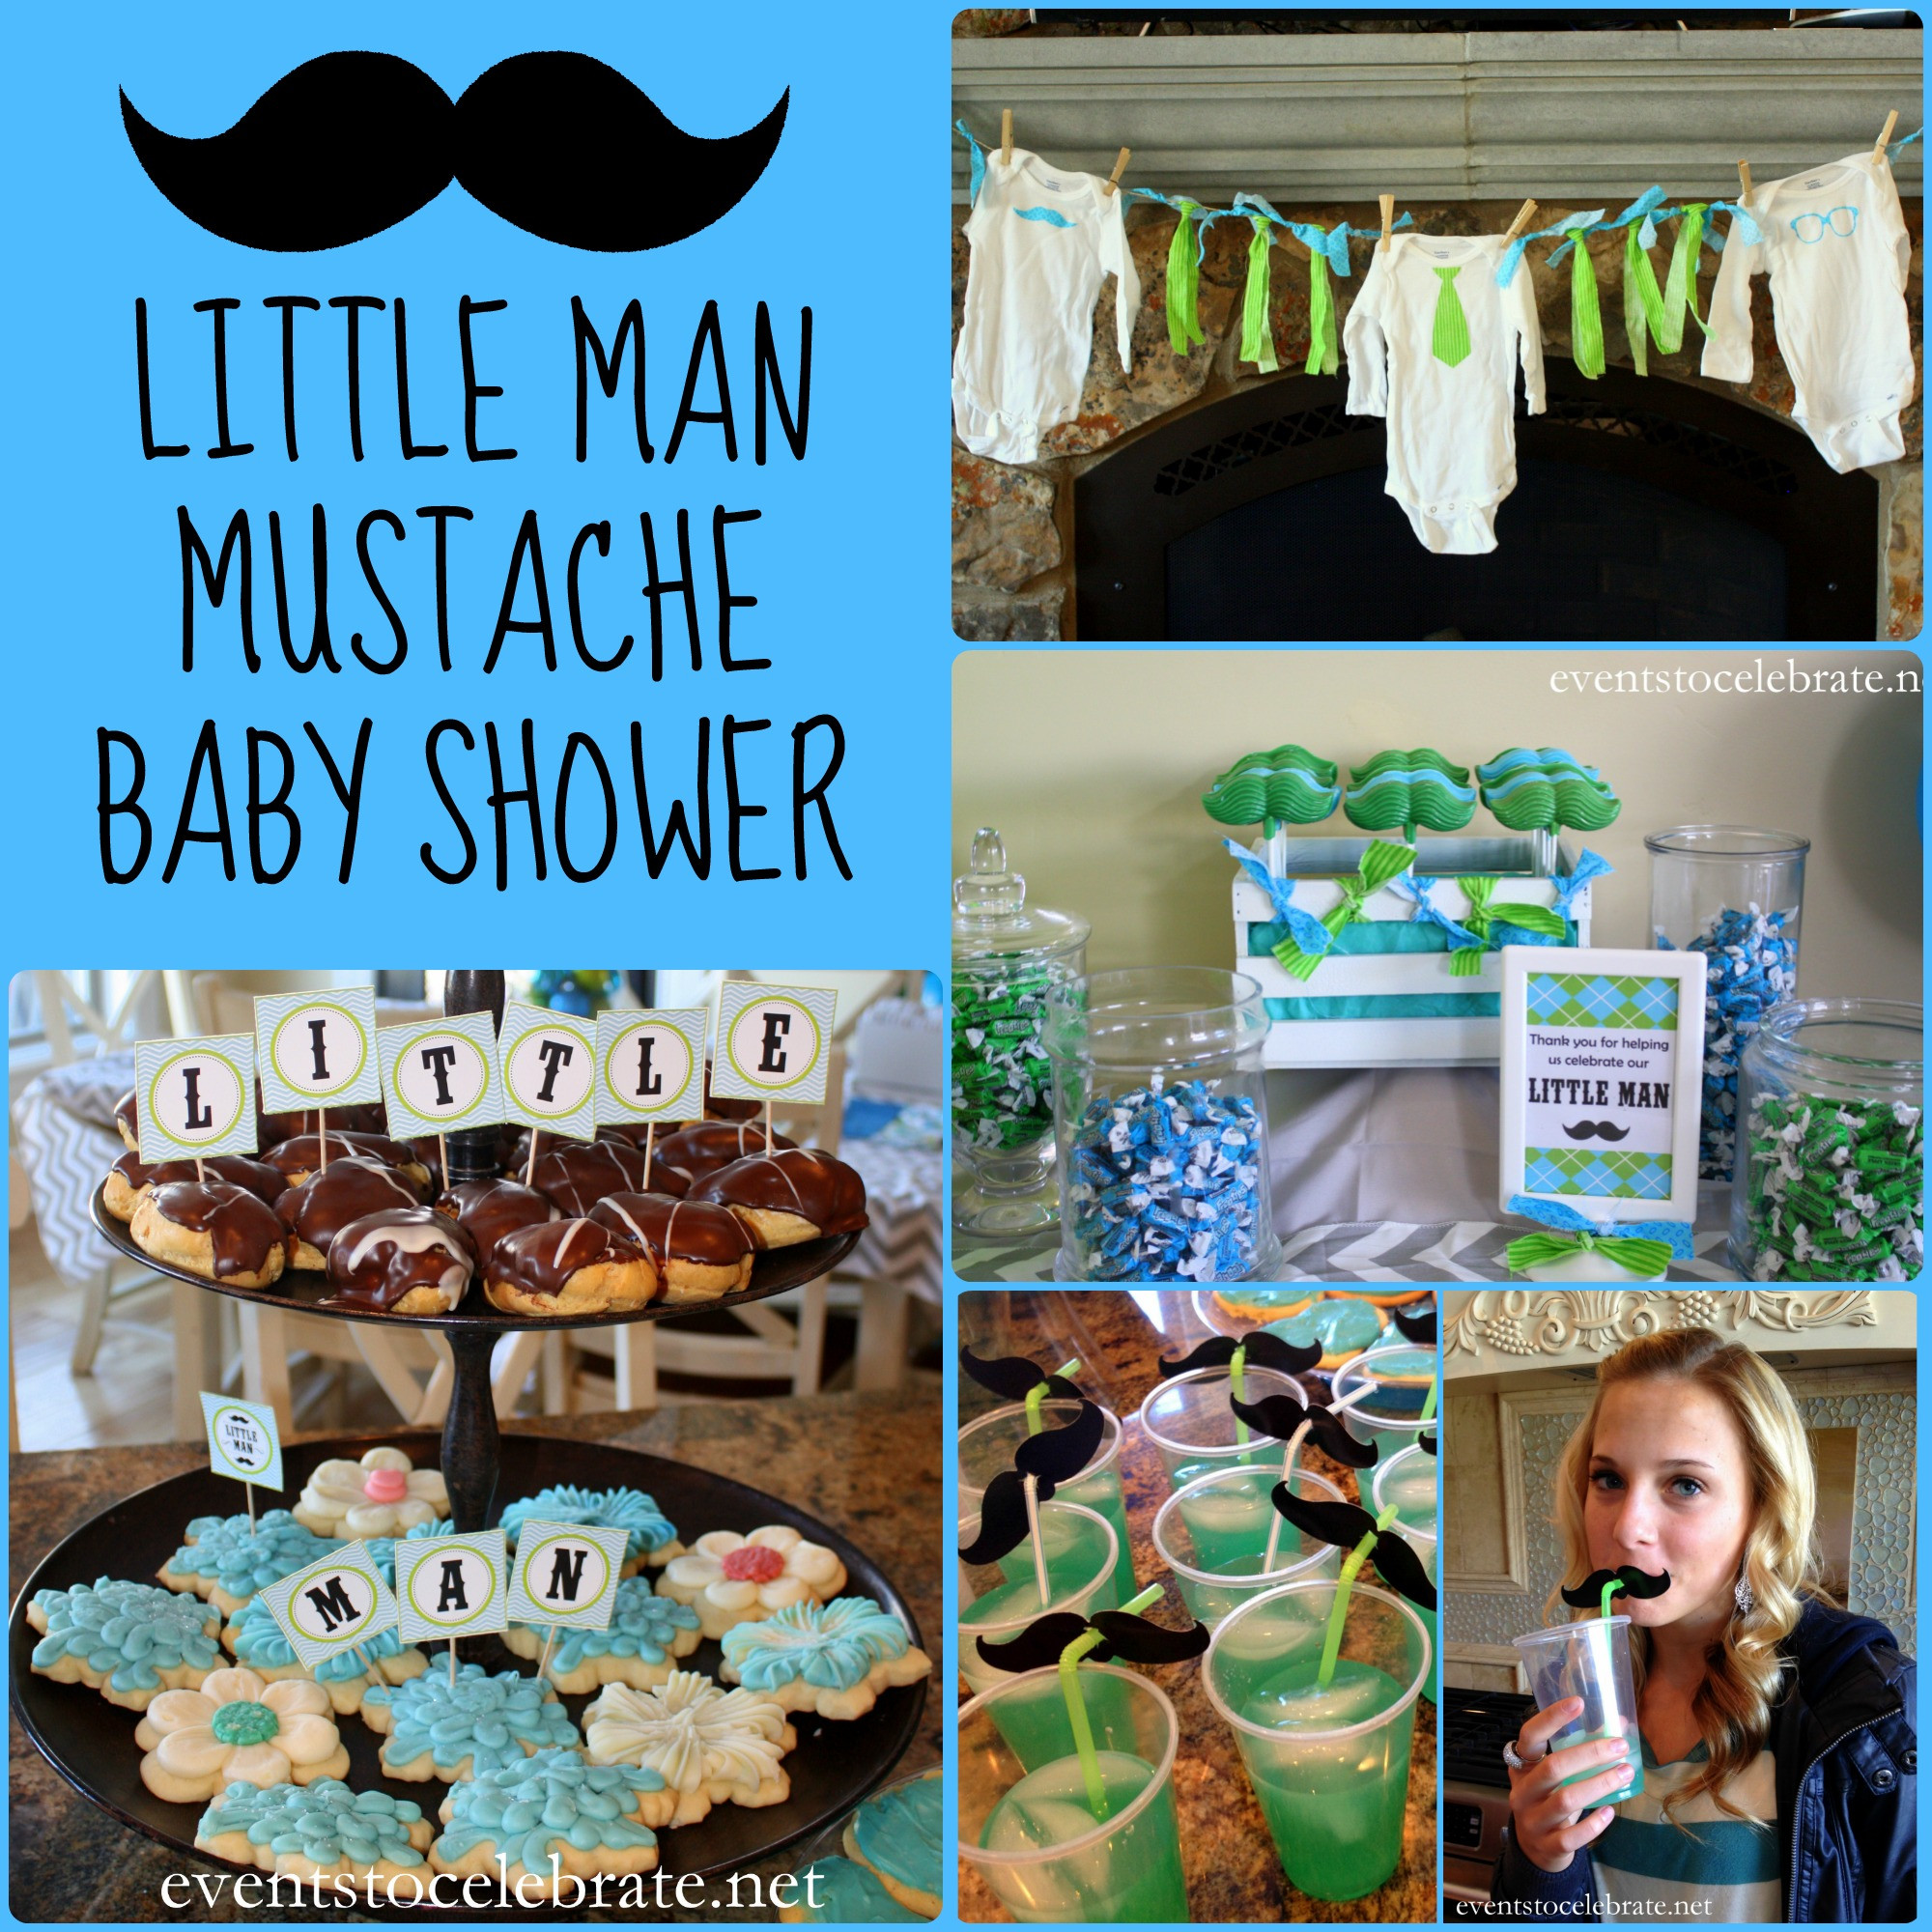 Mustache Baby Shower Party Supplies
 Little Man Mustache Baby Shower events to CELEBRATE